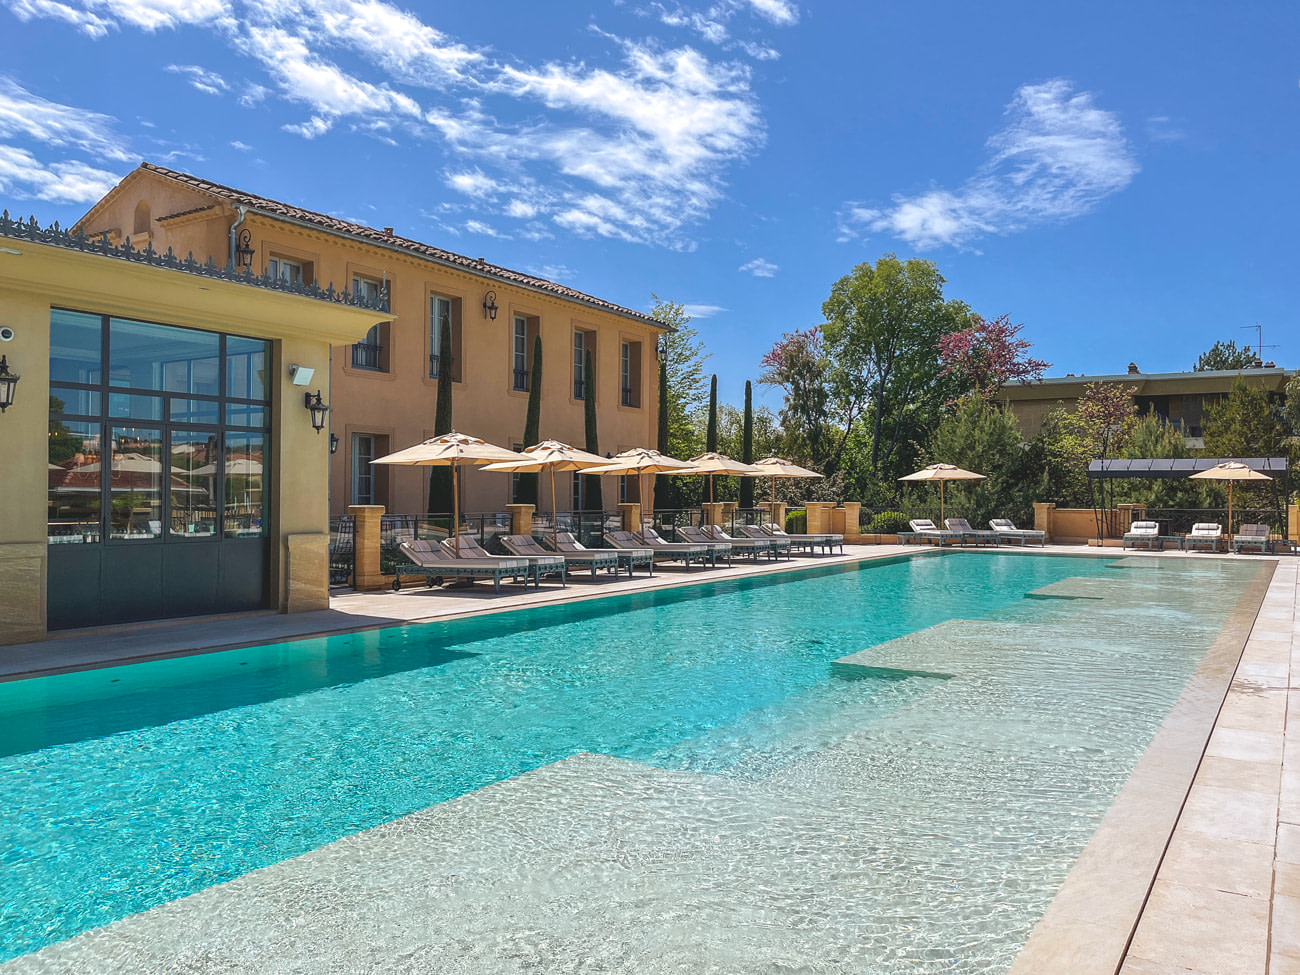 Hotel with swimming pool in Aix-en-Provence